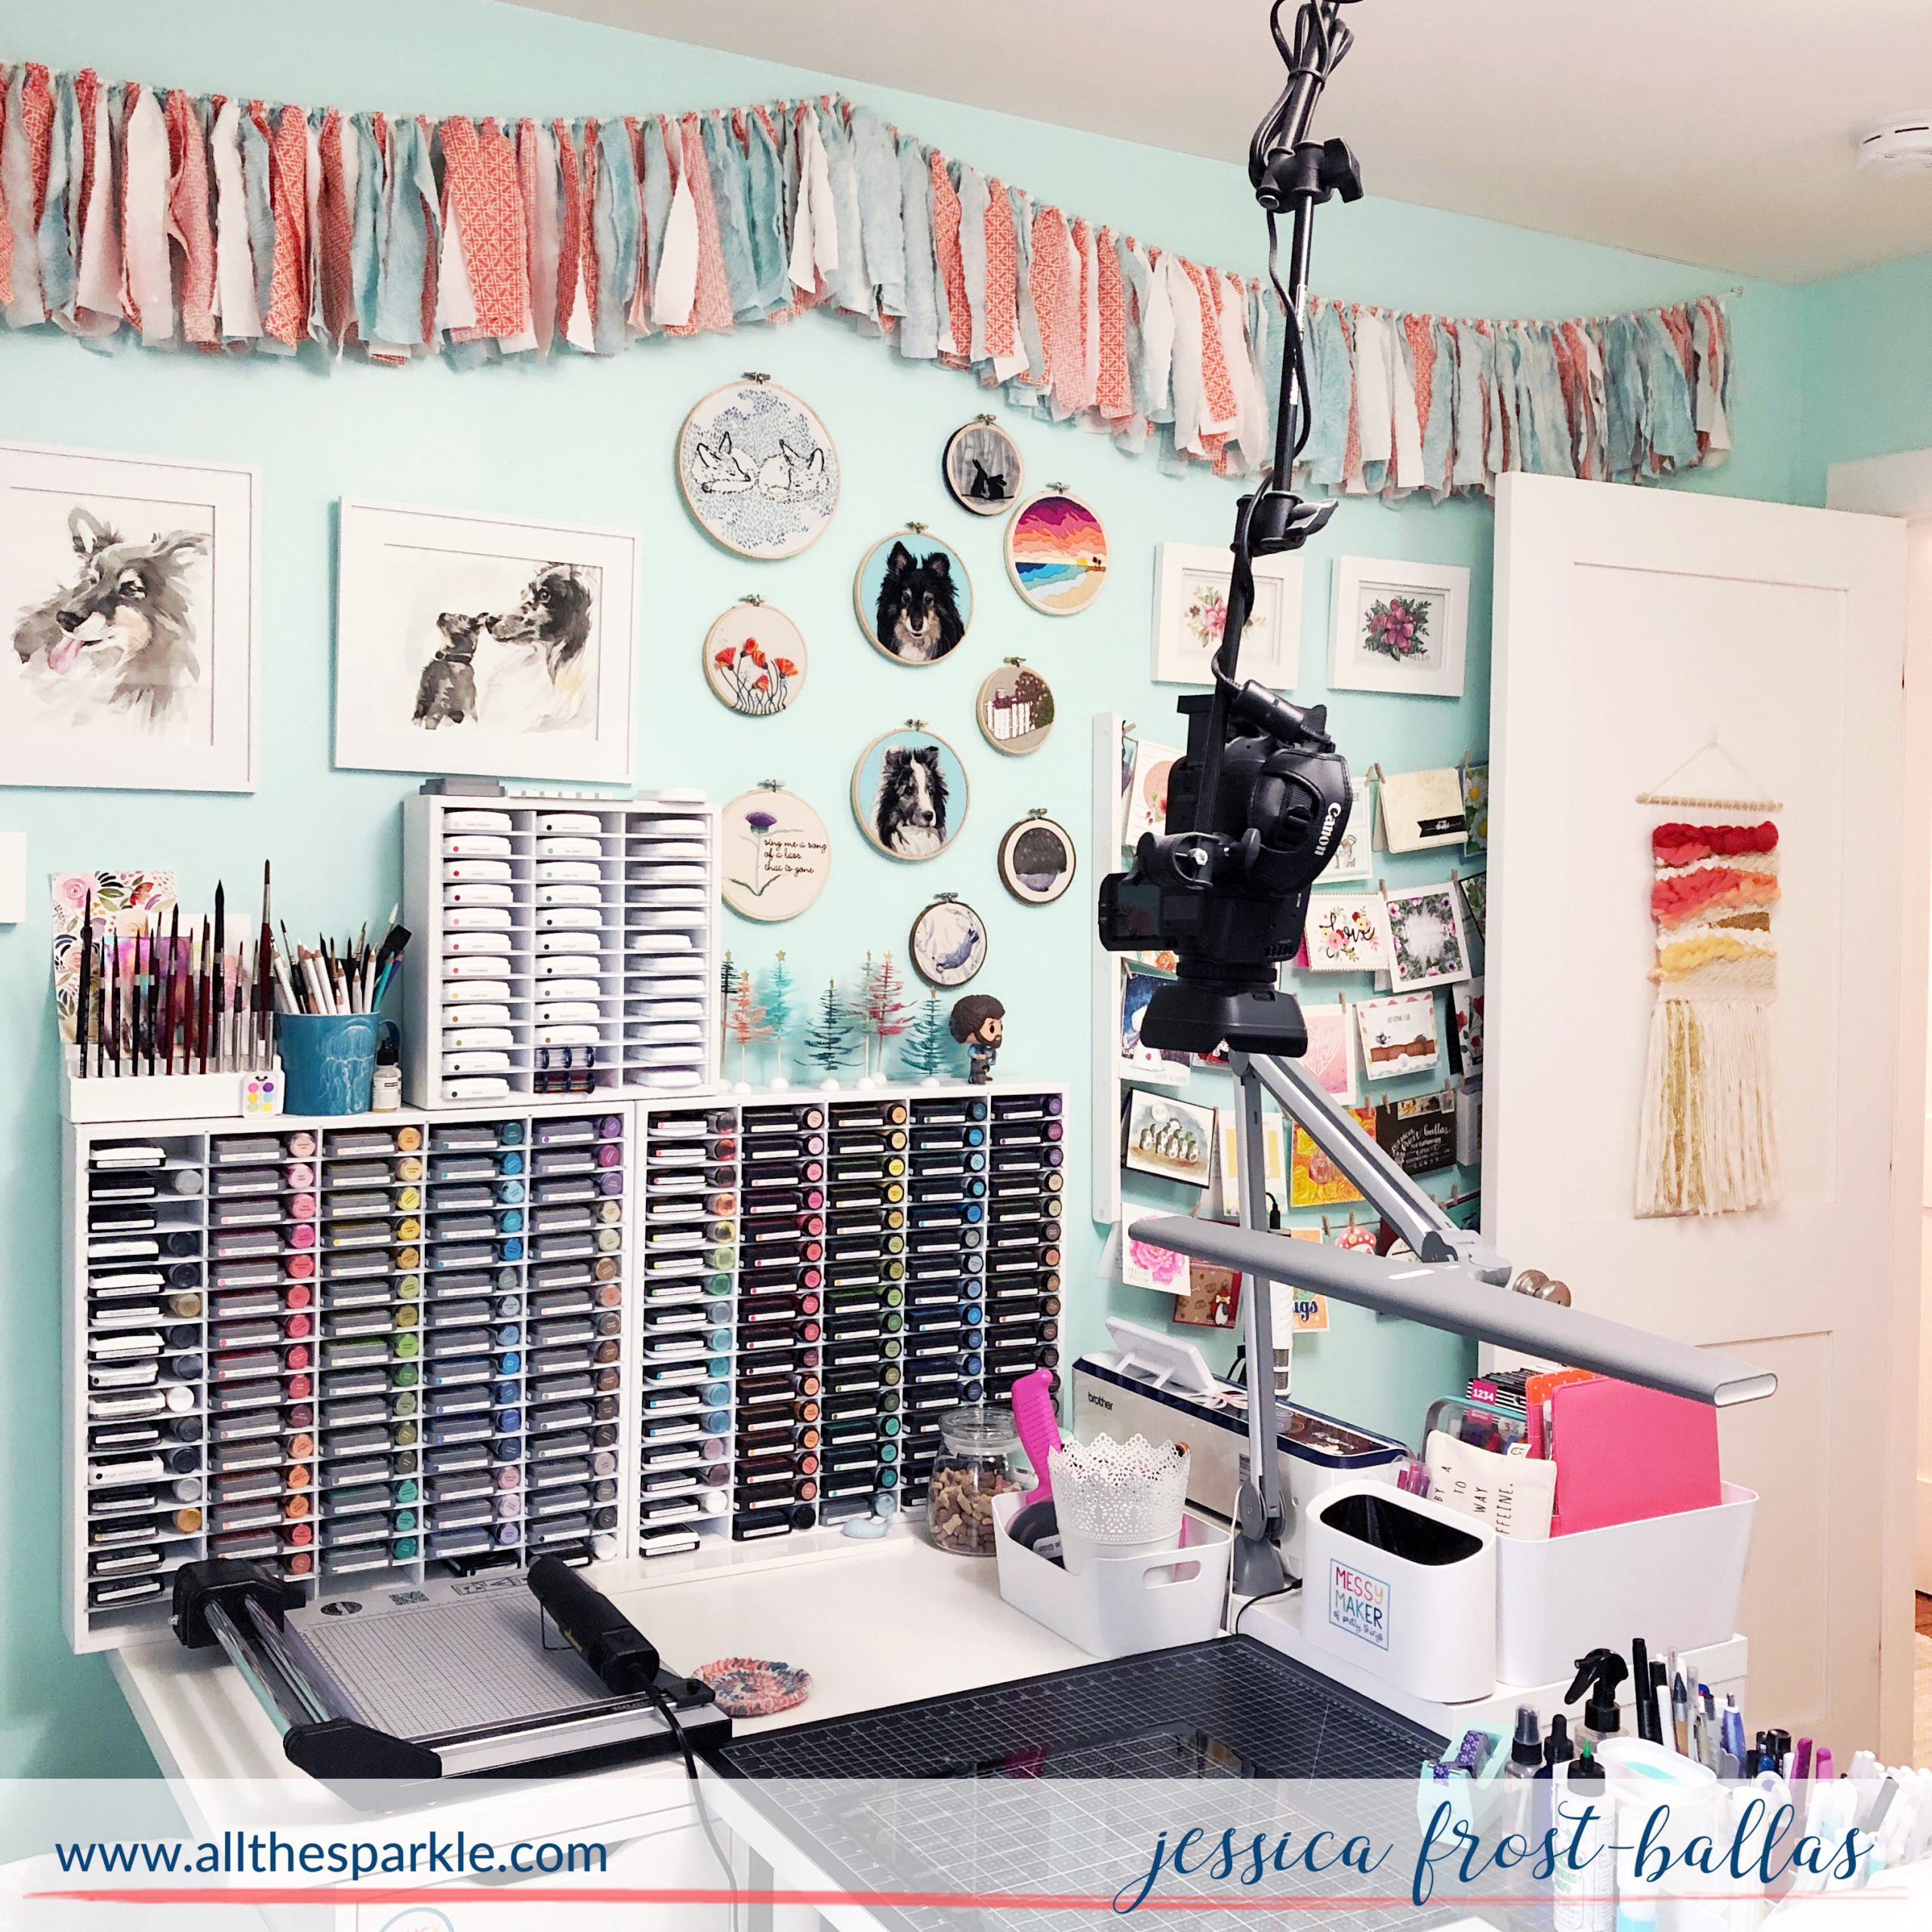 All the Sparkle Craft Room Tour by Jessica Frost-Ballas